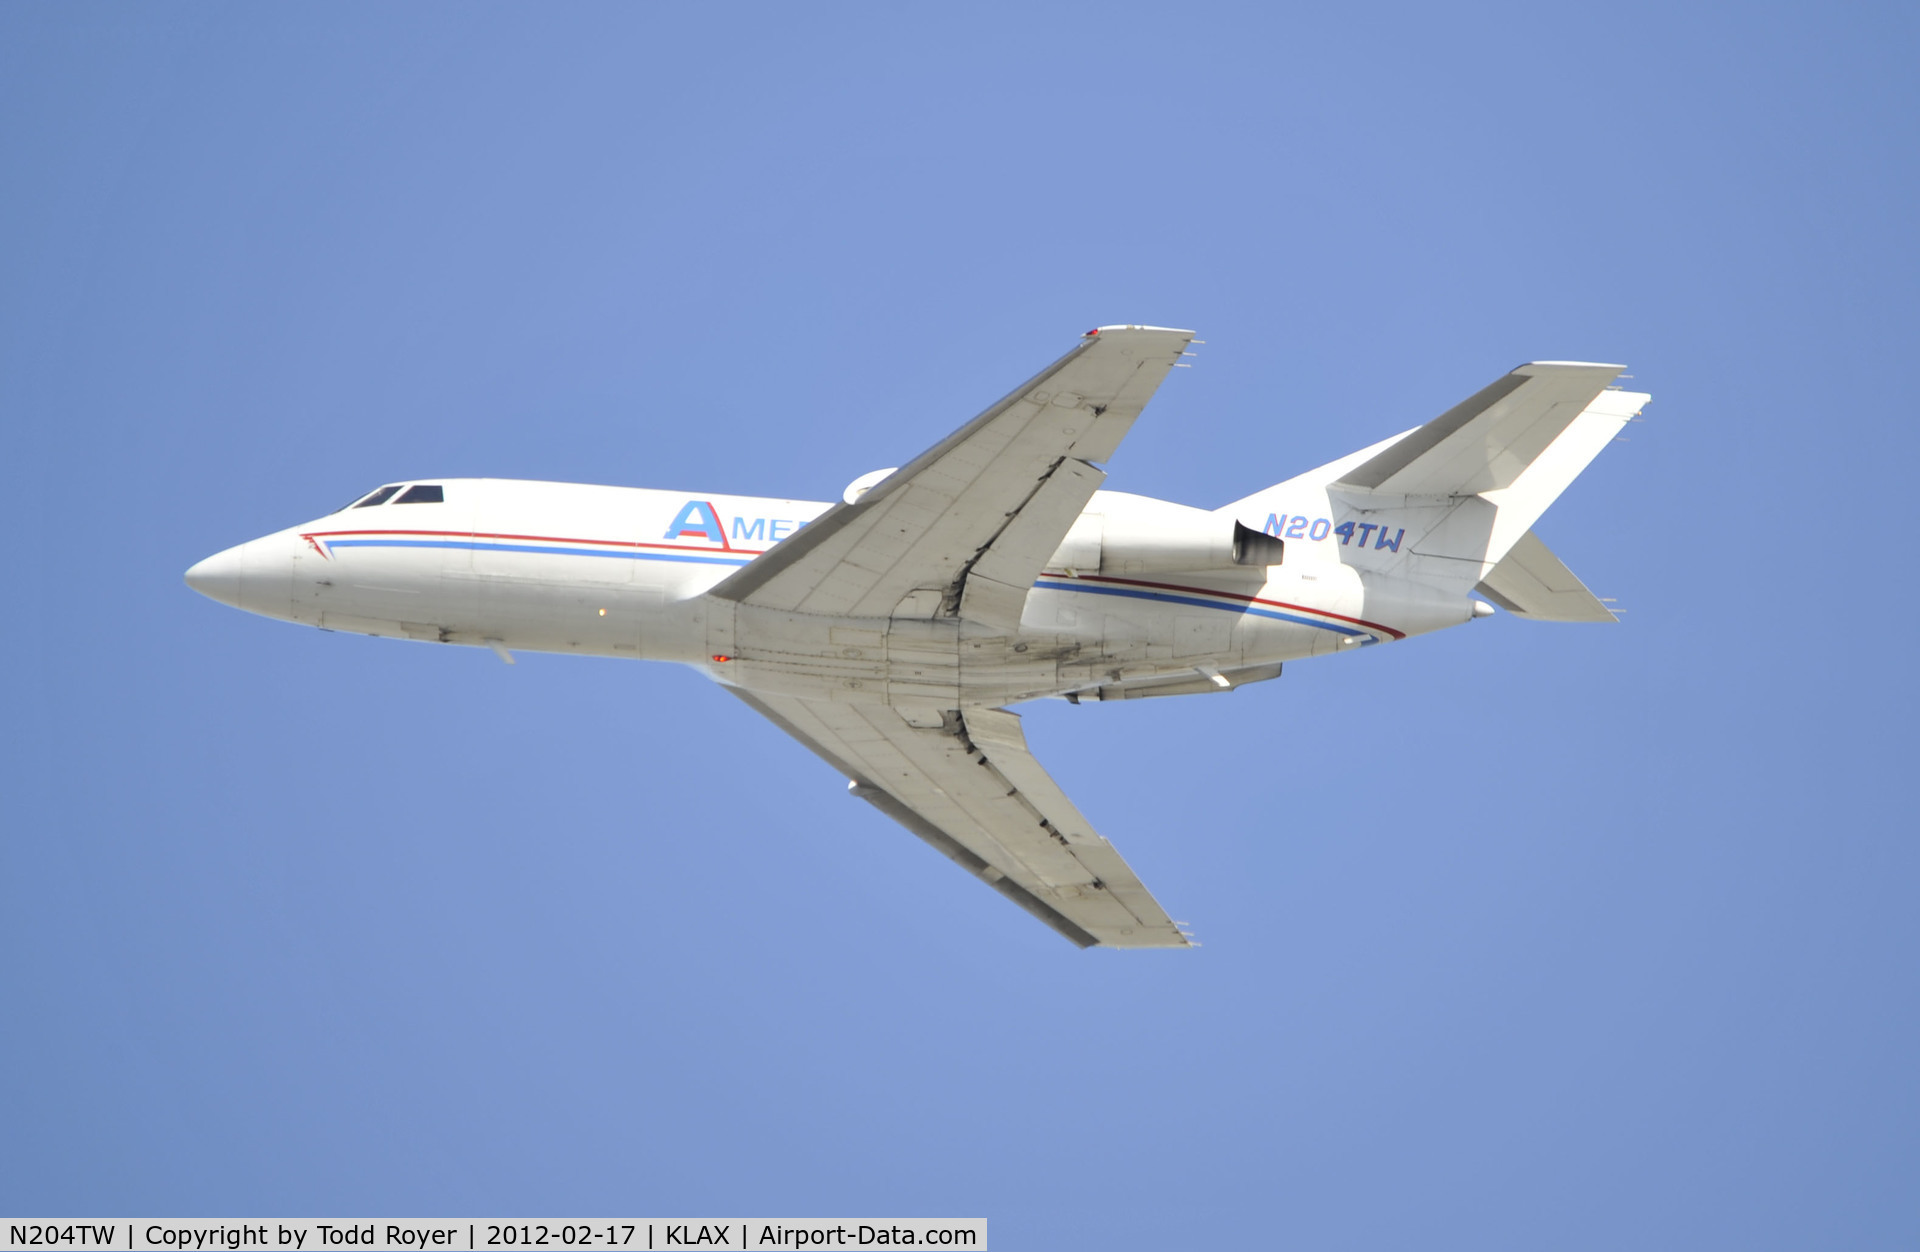 N204TW, 1969 Dassault Falcon (Mystere) 20D C/N 204, departing LAX on 25L